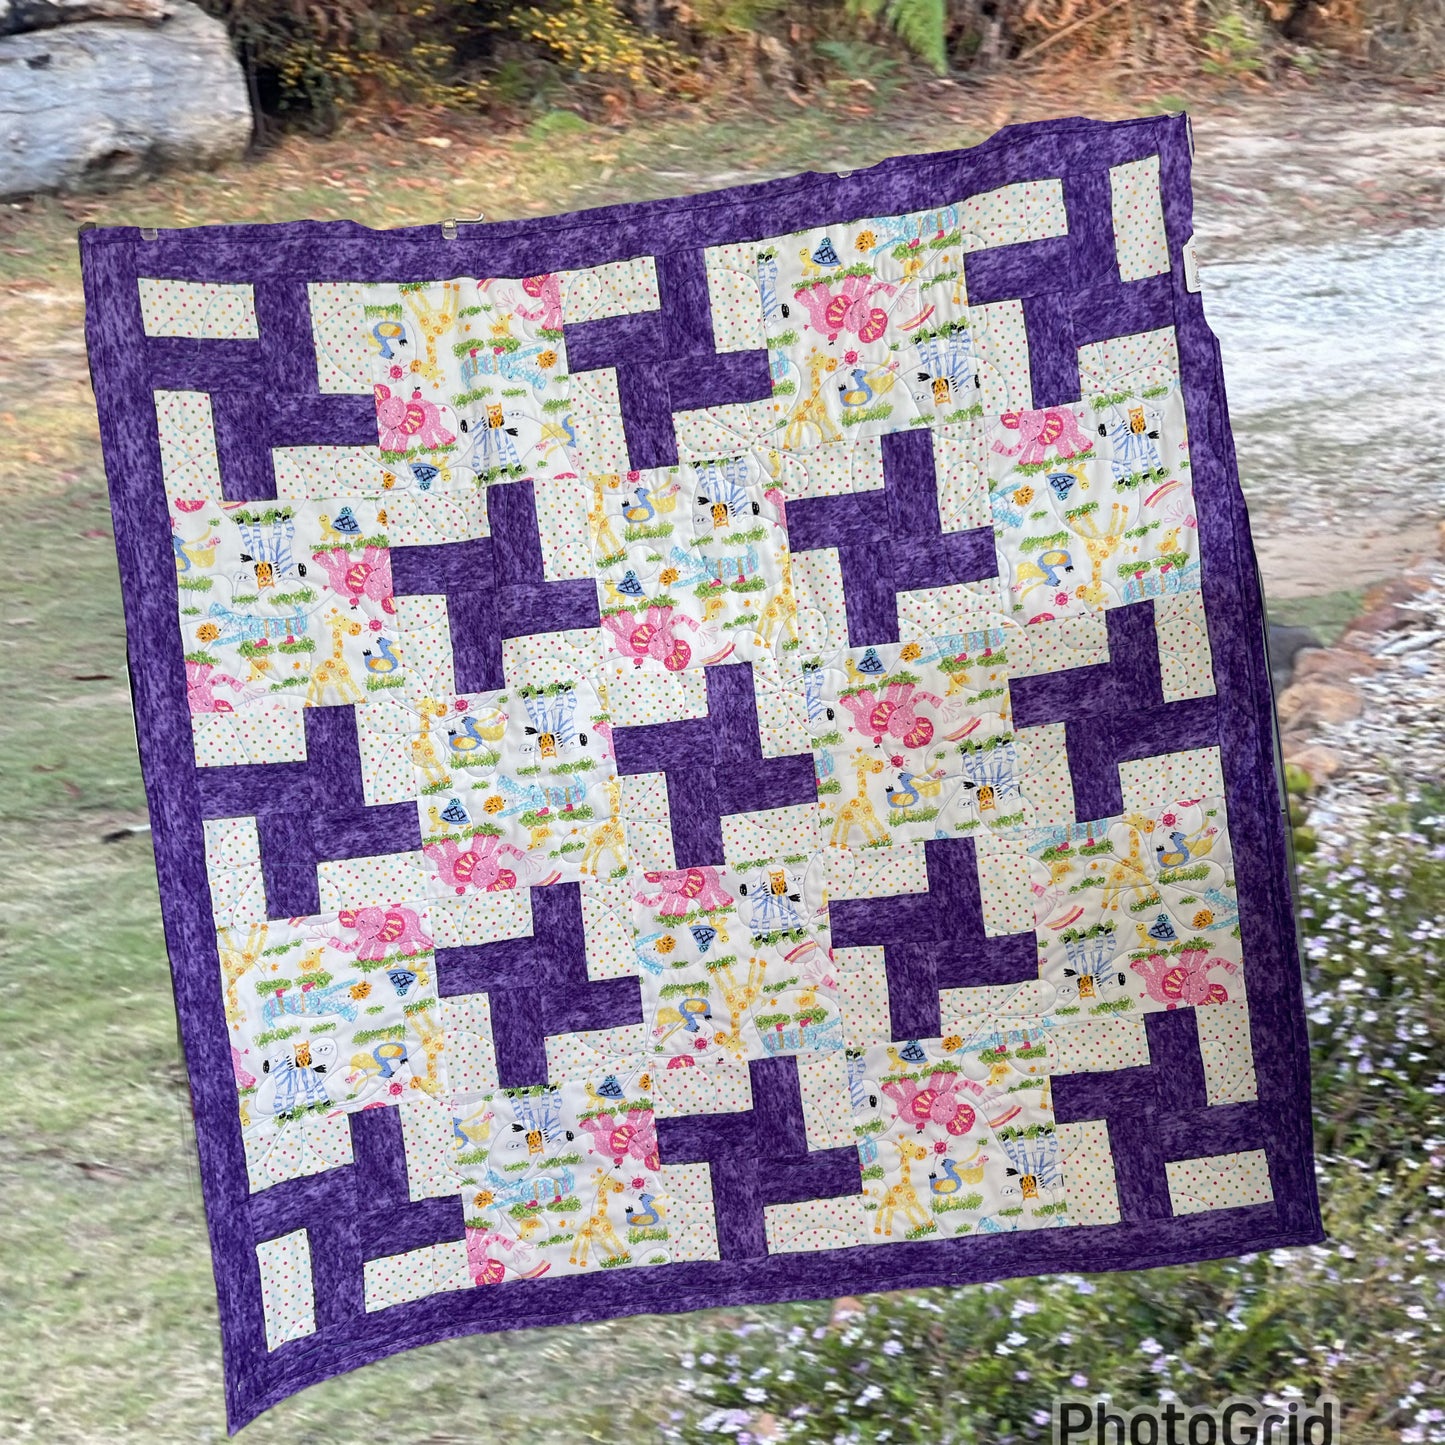 Double Twirl Quilt Finished Size 44" x 44" Approx